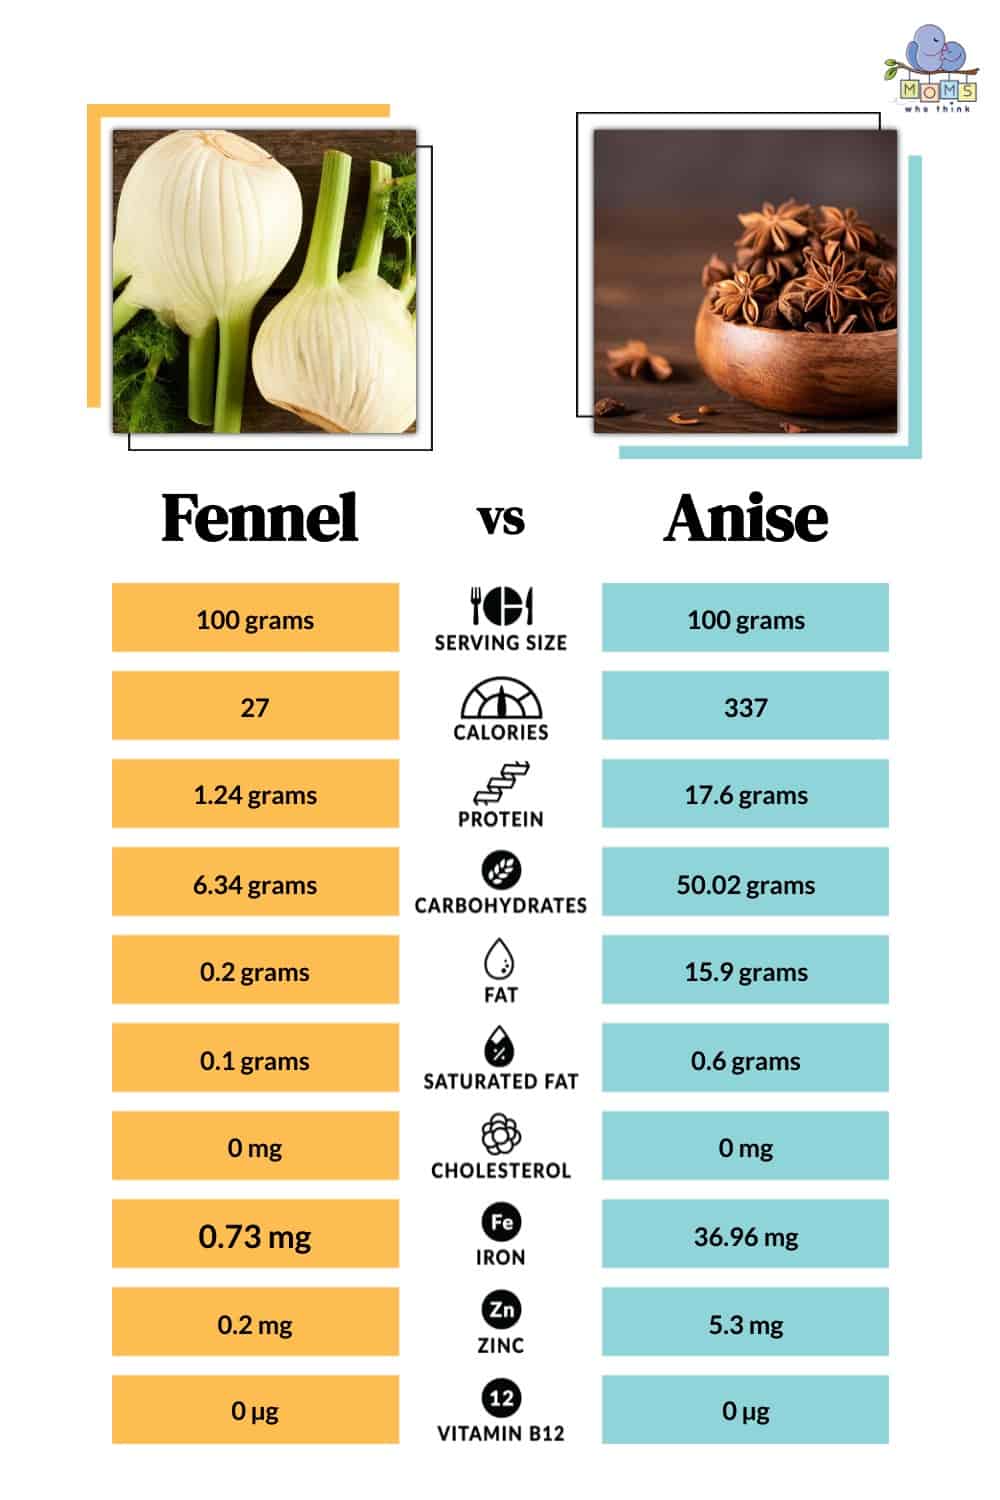 Fennel vs Anise Nutritional Facts